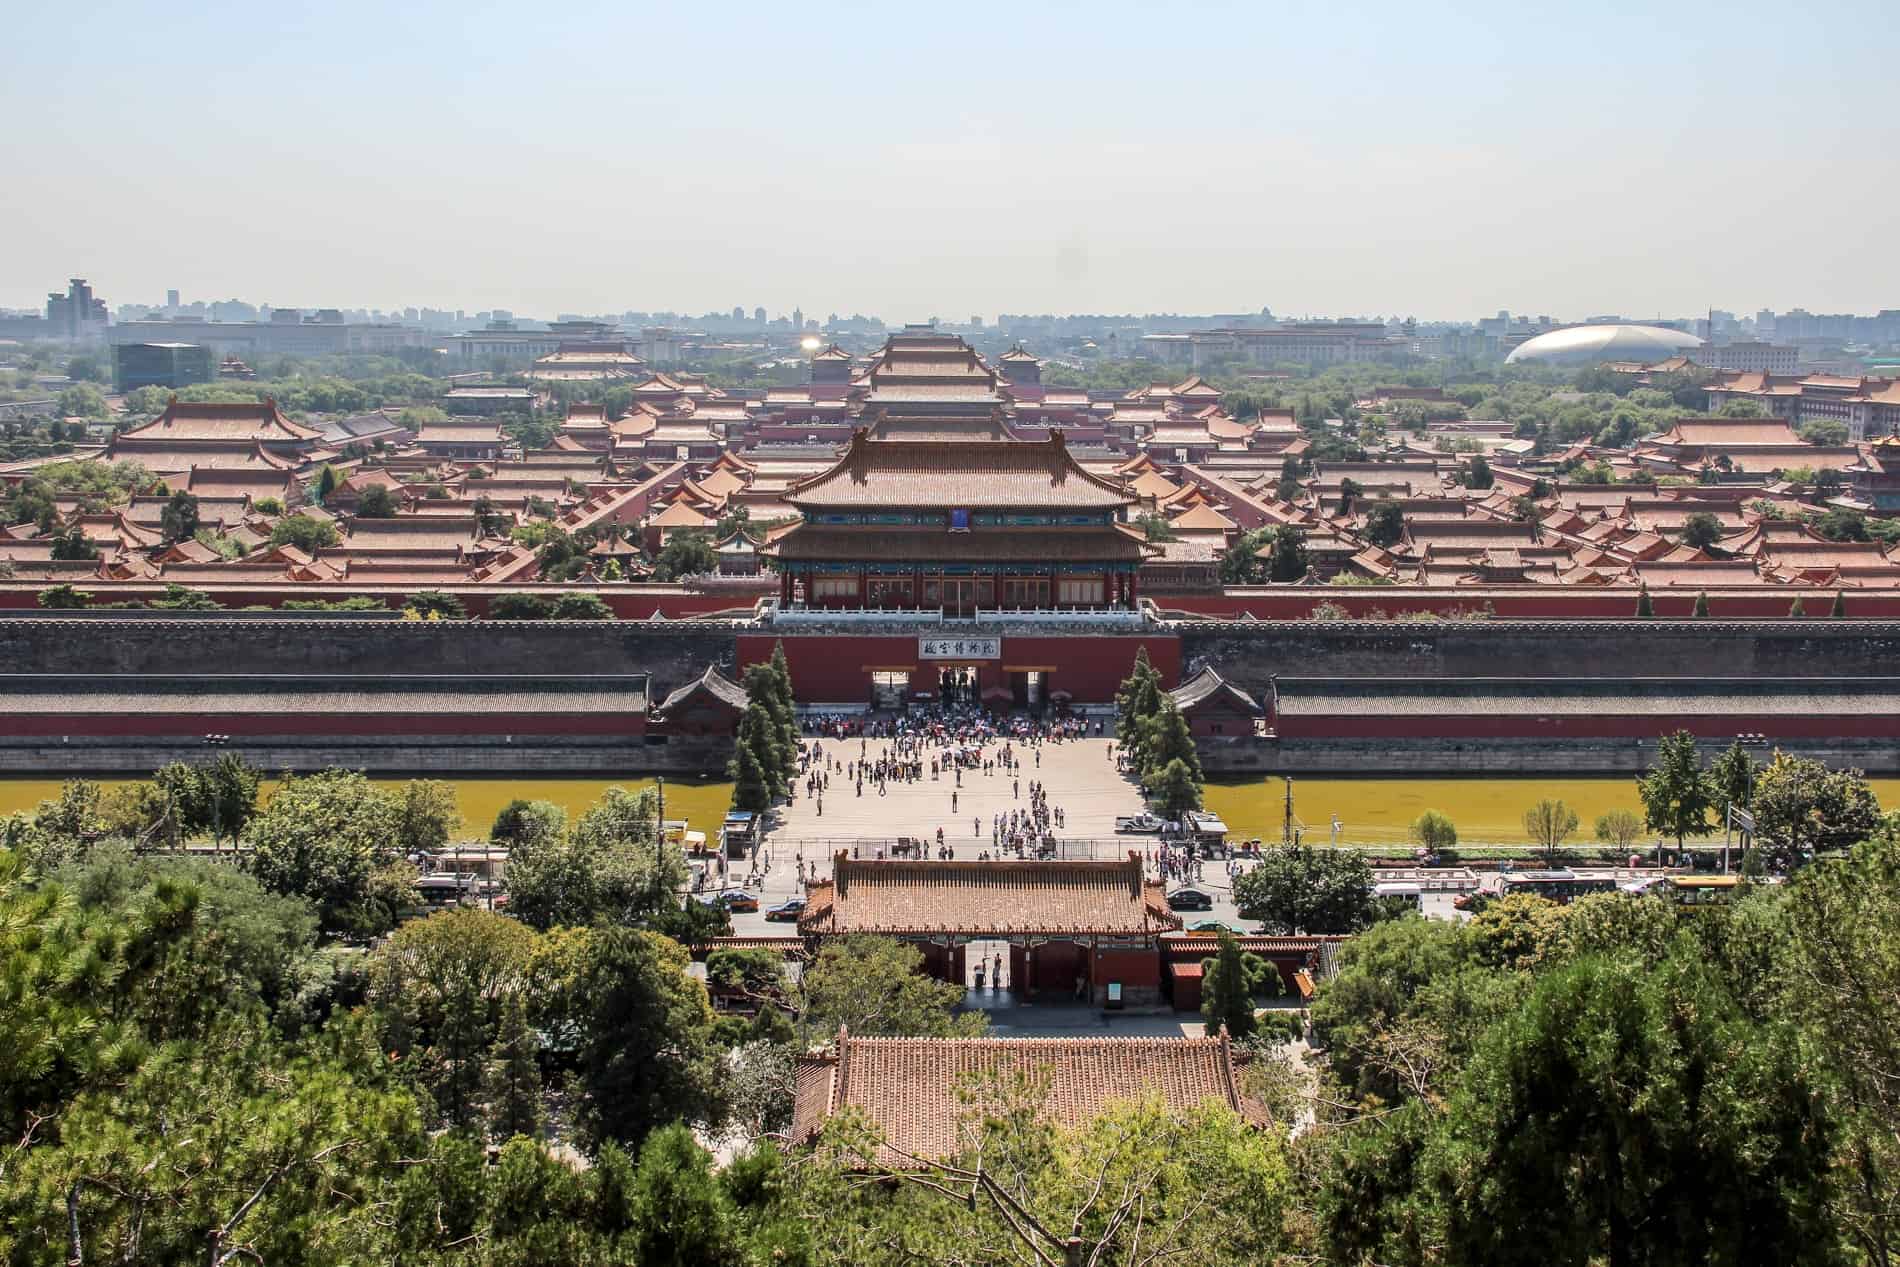 Hilltop view over the huge walled Forbidden City palace complex made up of dozens of buildings. 